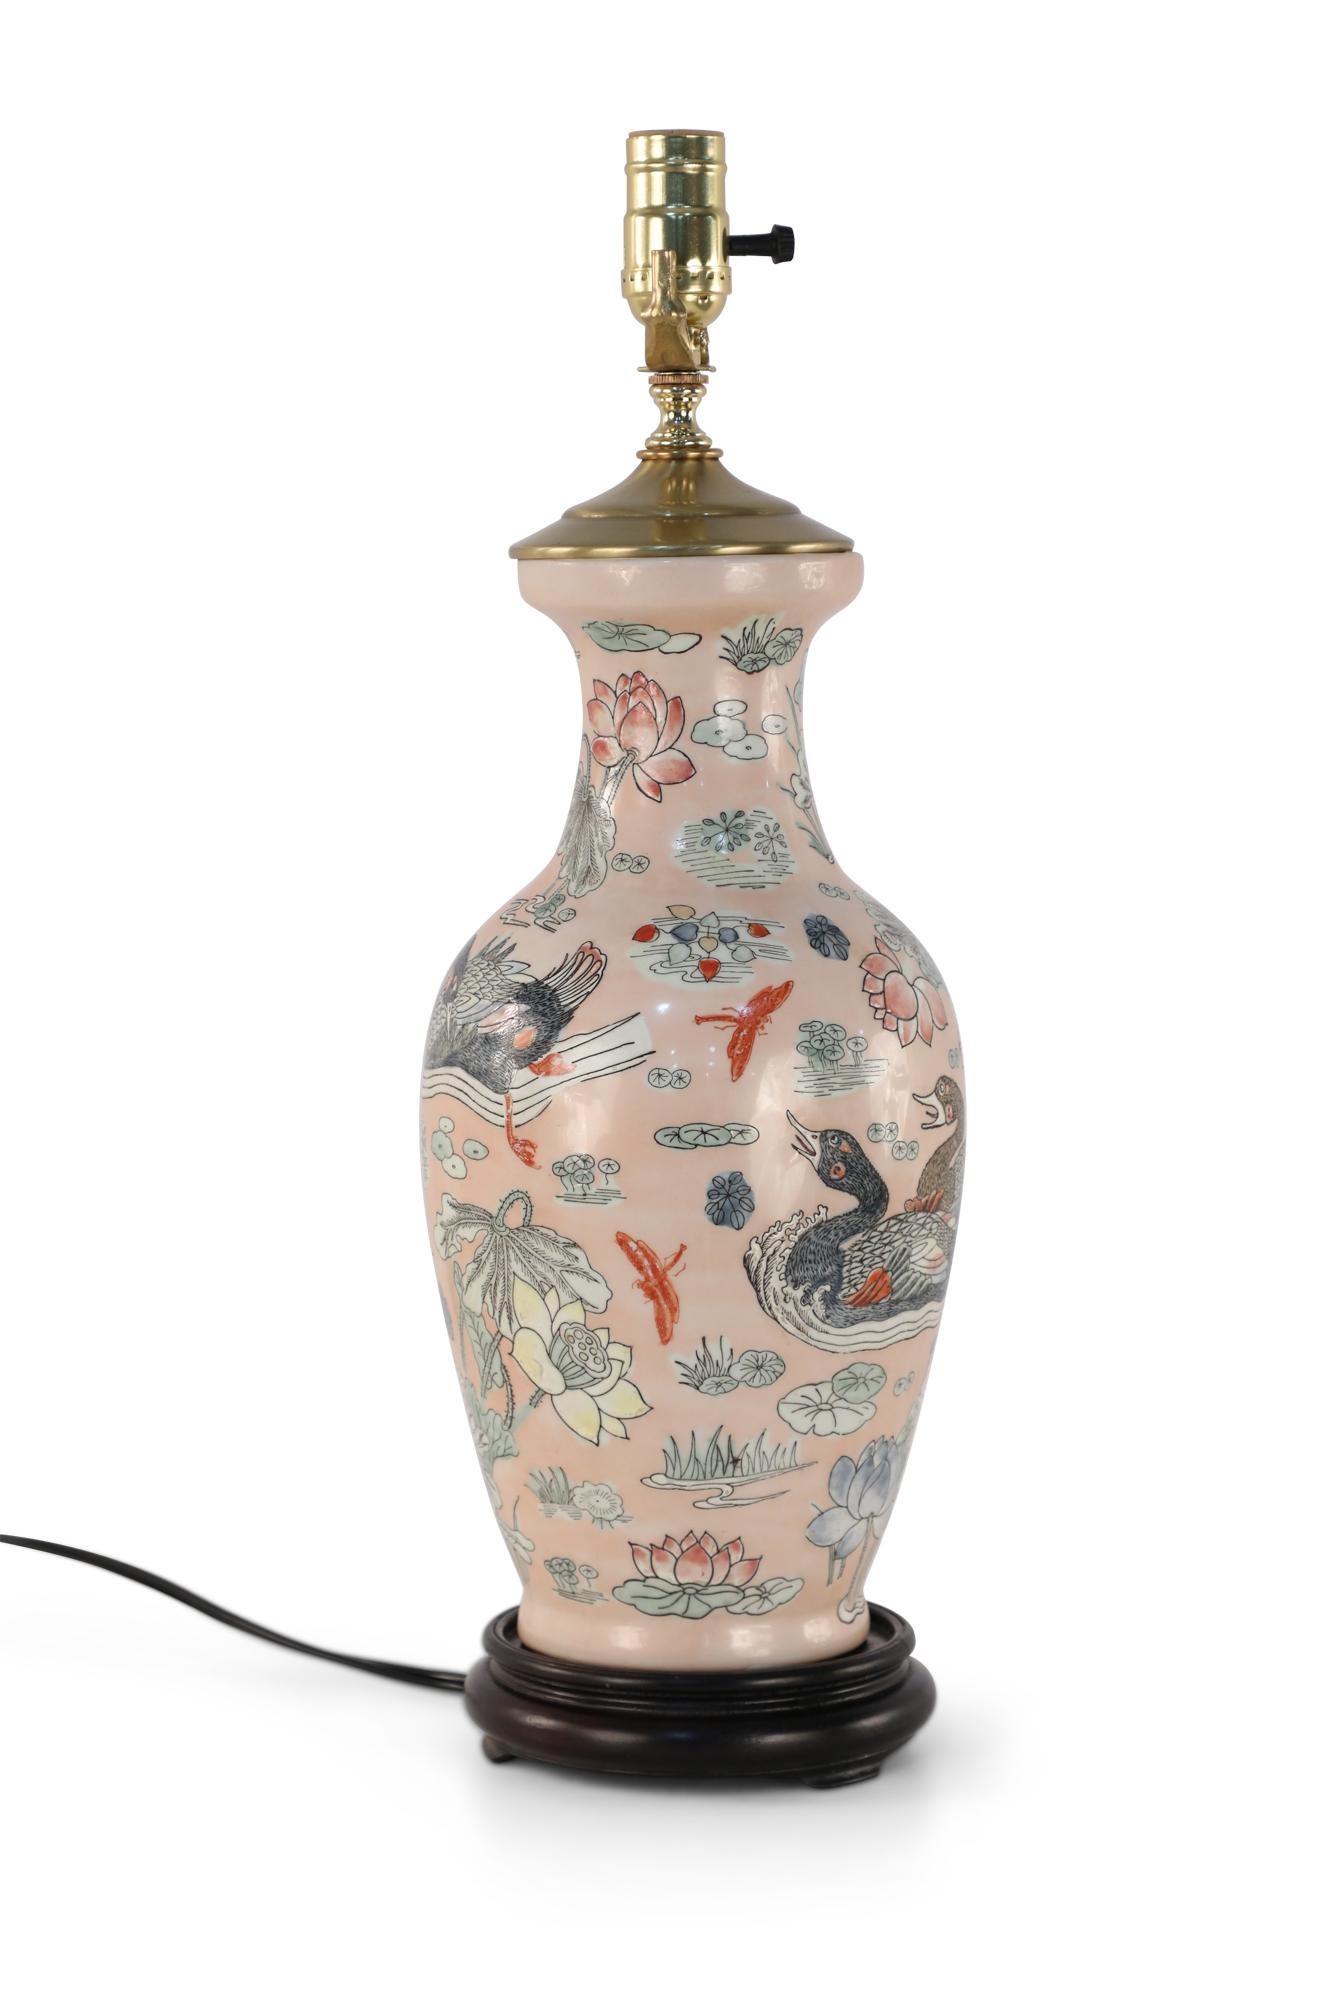 Chinese pink ceramic table lamp made from a baluster-shaped vase decorated with ducks in natural surroundings emphasized with linework and orange dragonflies, on a wooden base with brass hardware.